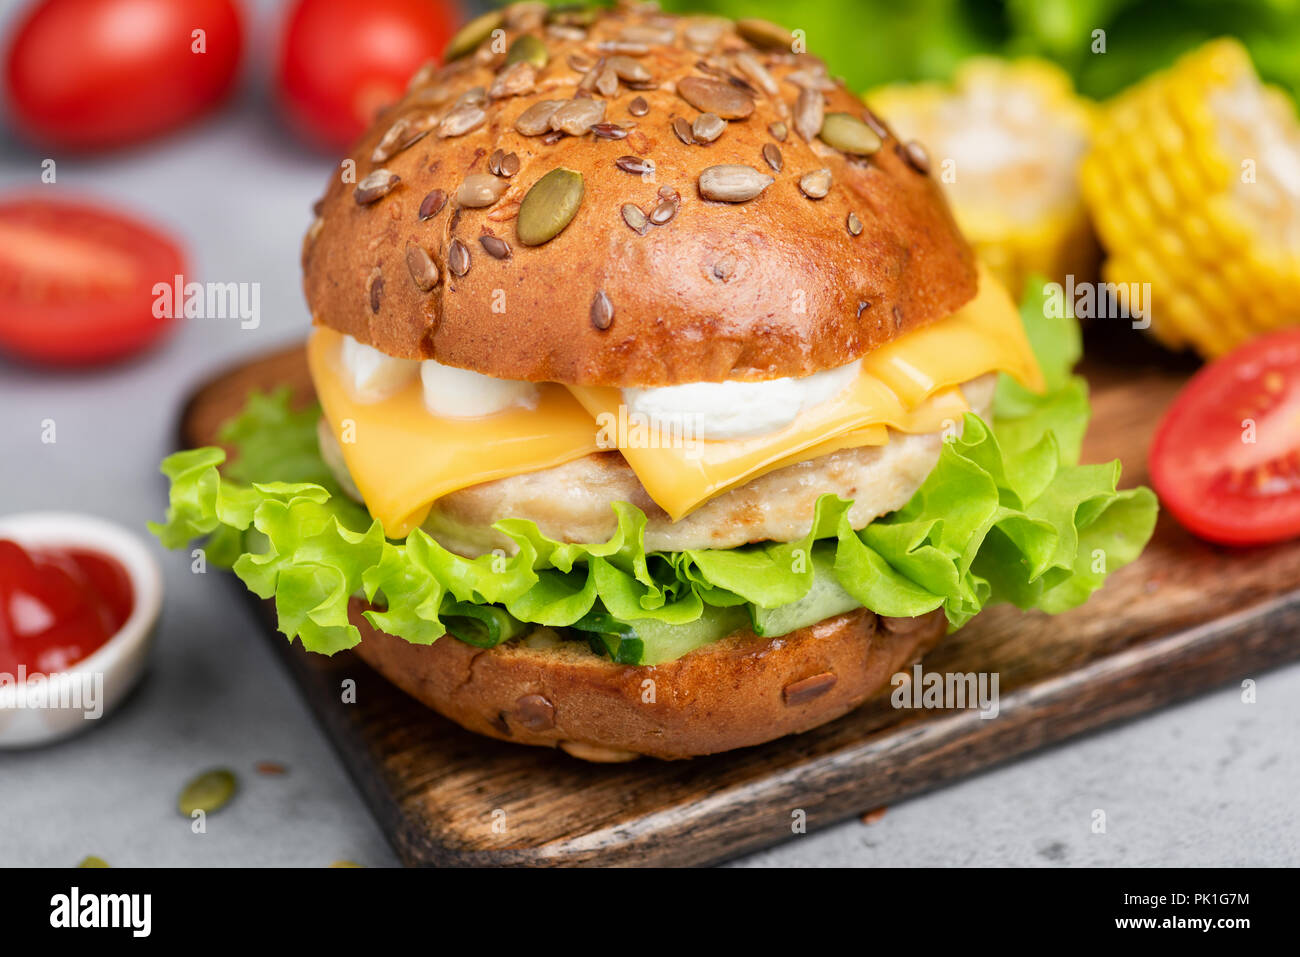 Chicken burger with cheese, lettuce and sauce on wooden serving board. Closeup view. Tasty juicy burger Stock Photo